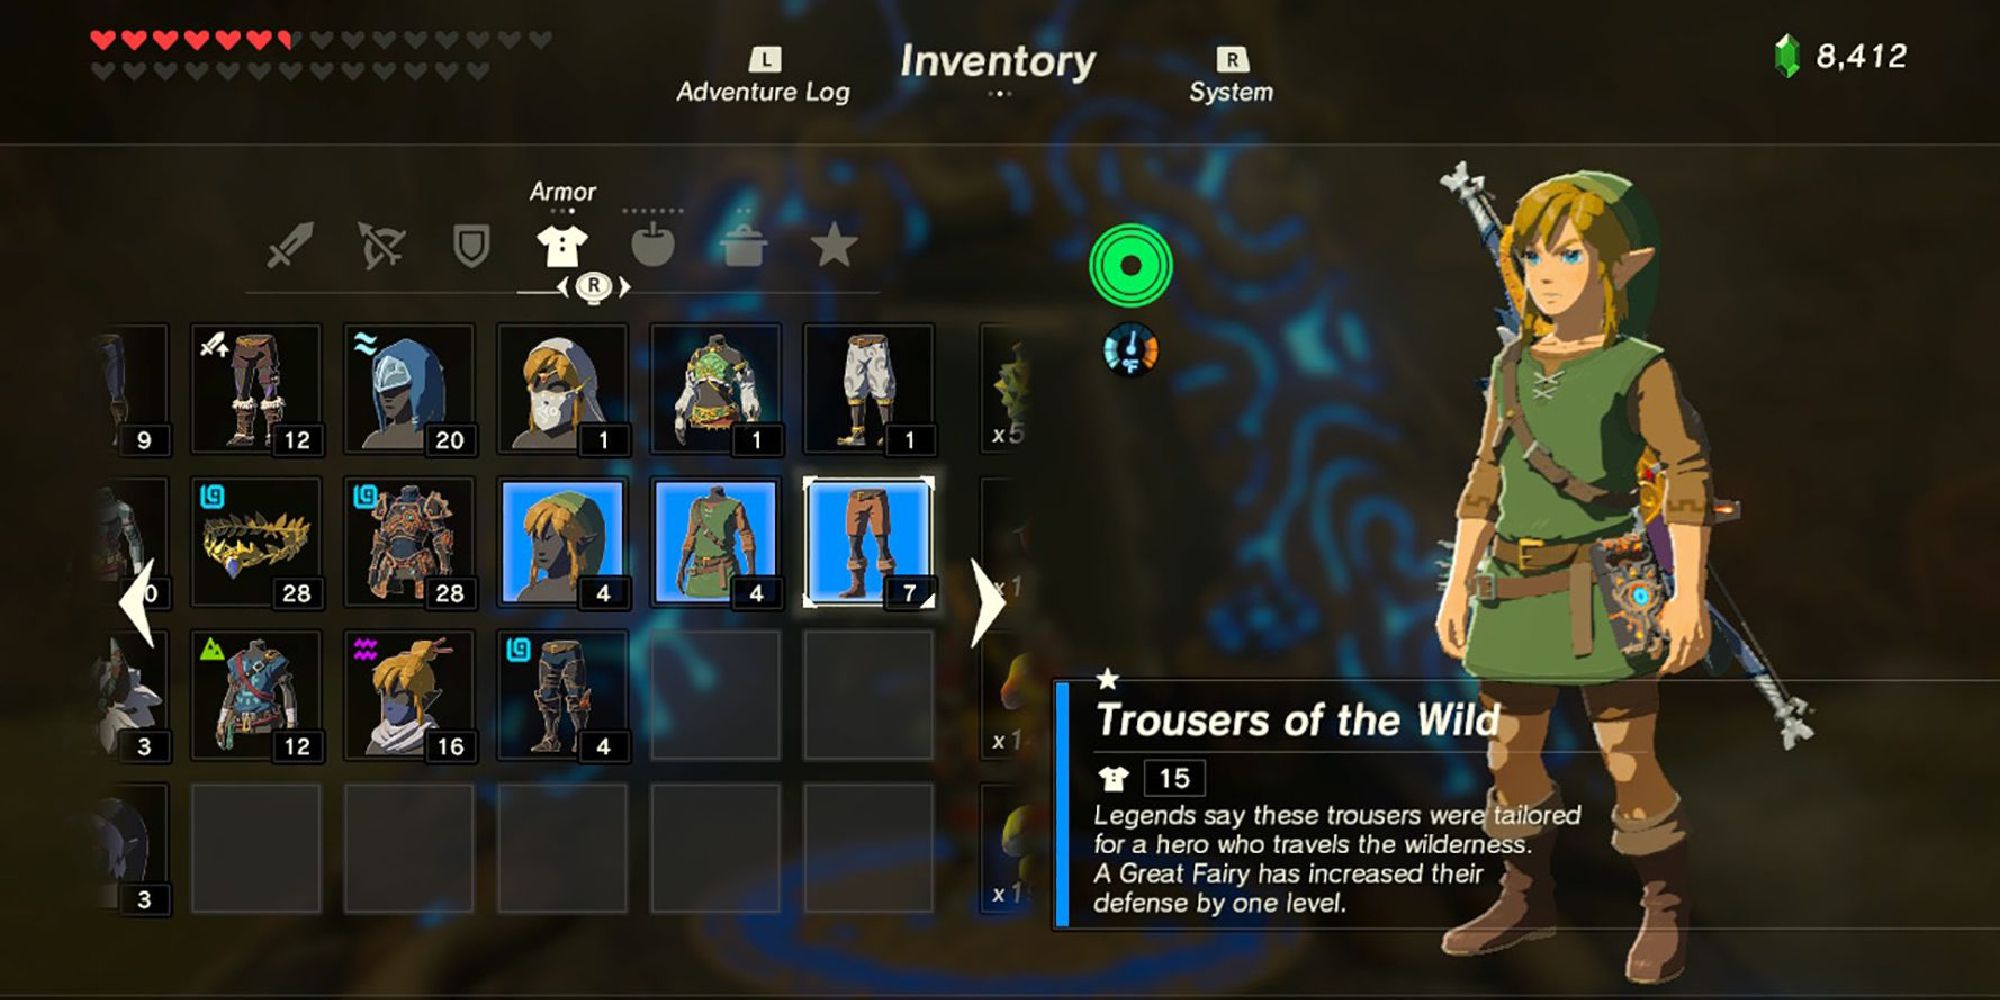 Link selecting the classic Link outfit from the armor inventory in BOTW